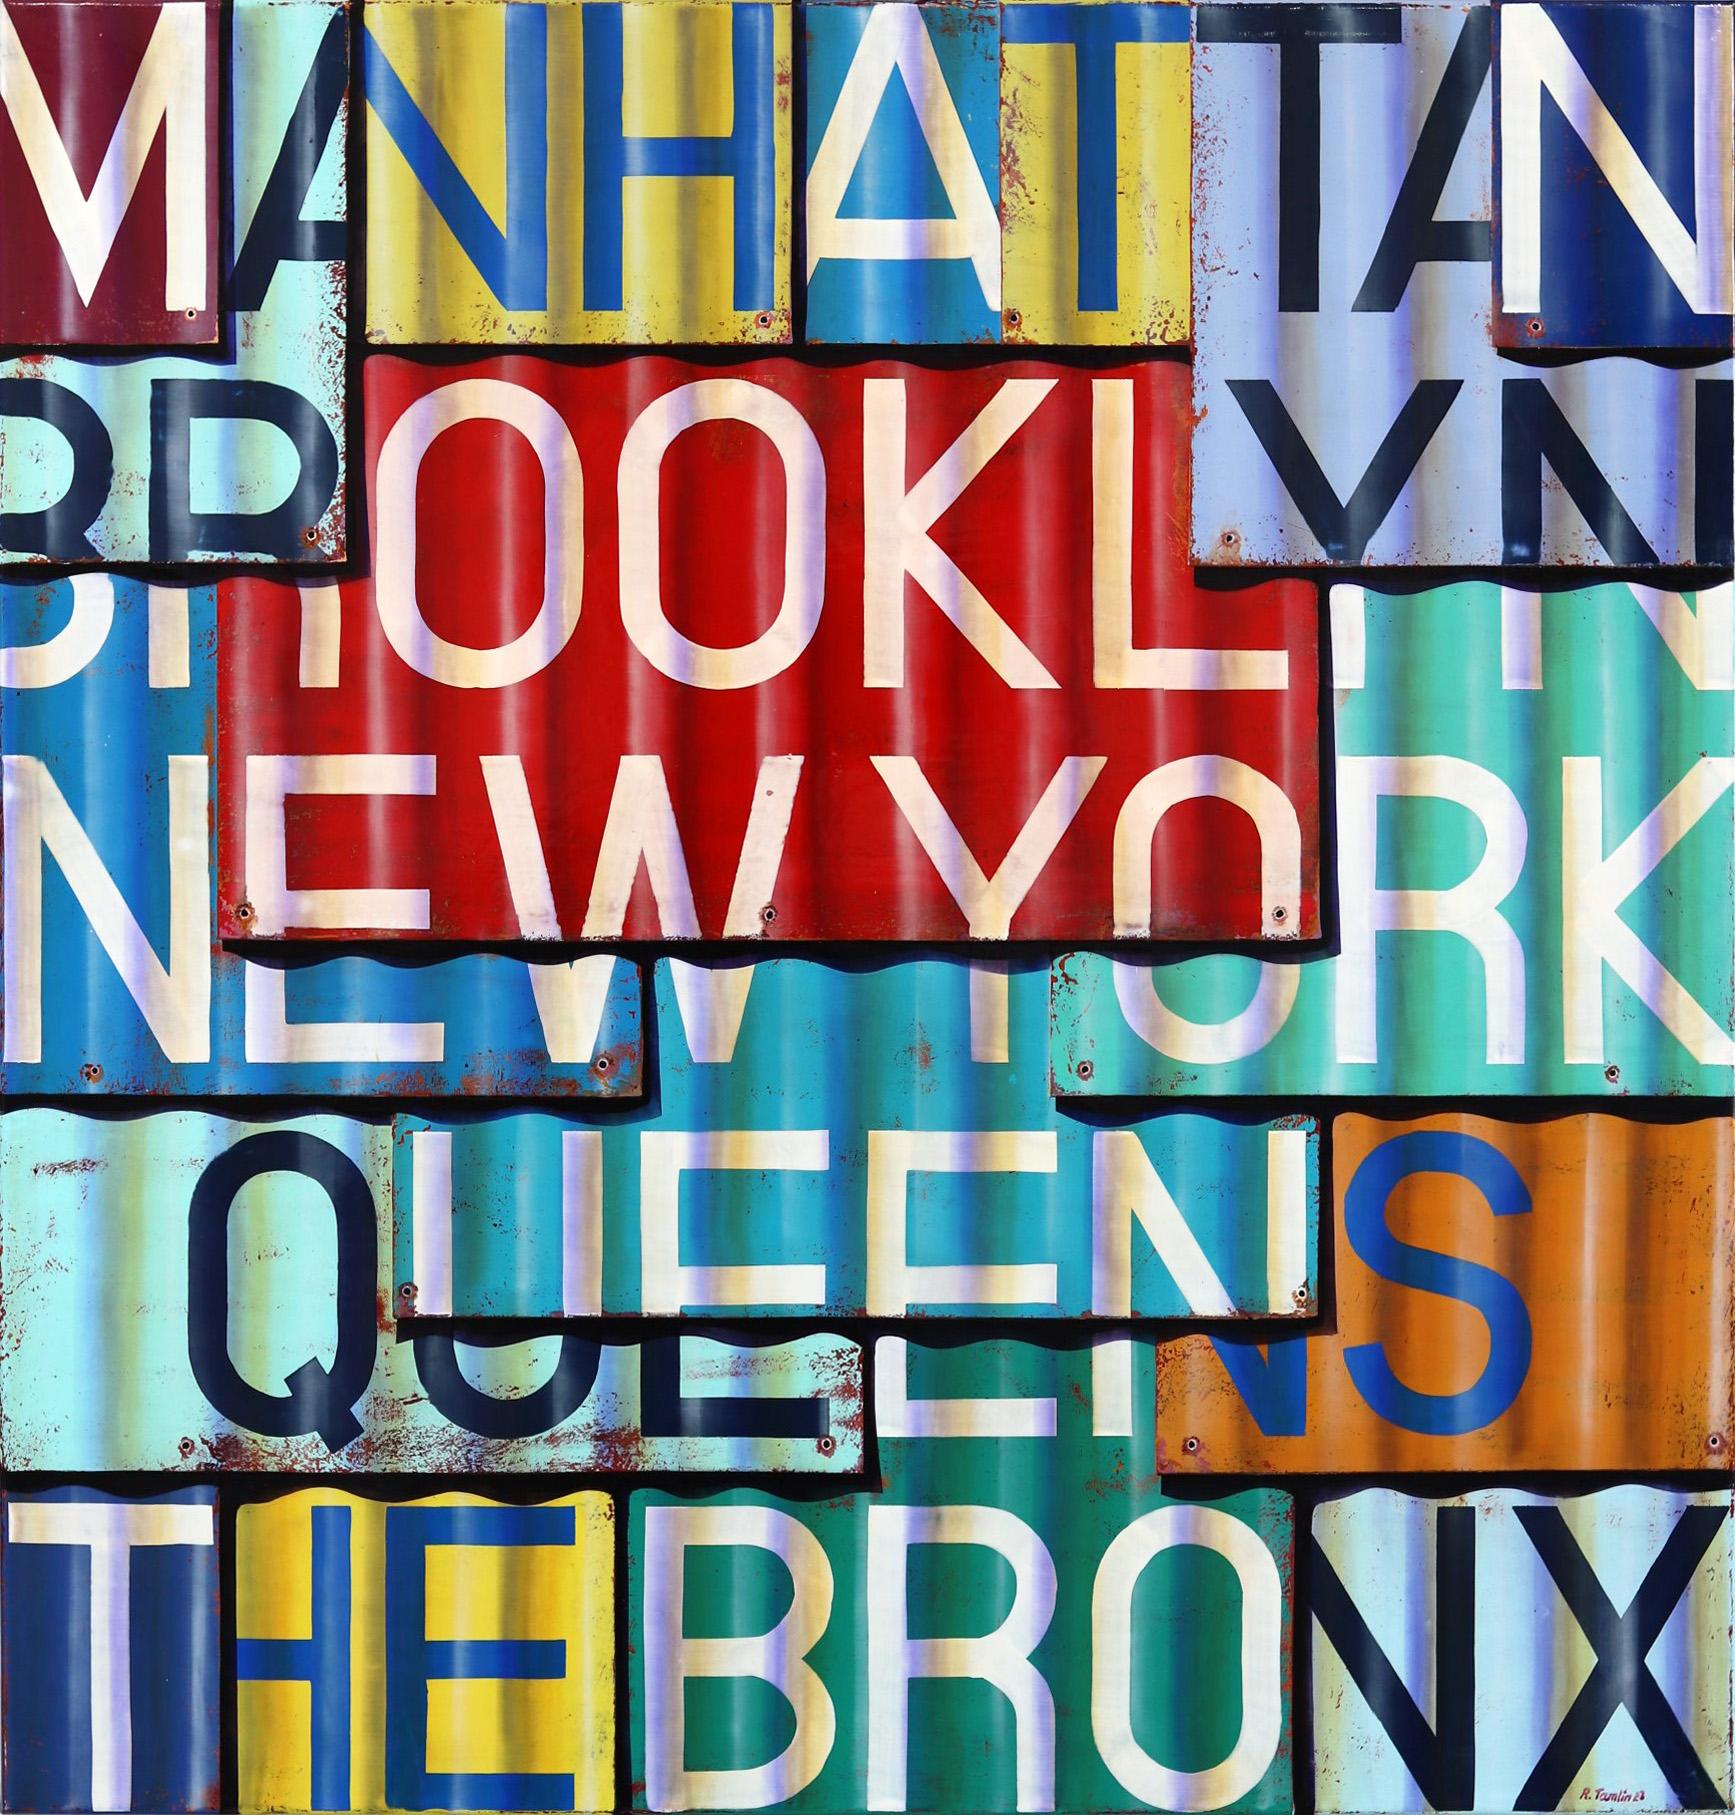 New York - Photorealistic Sign Painting with Oil and Enamel on Canvas